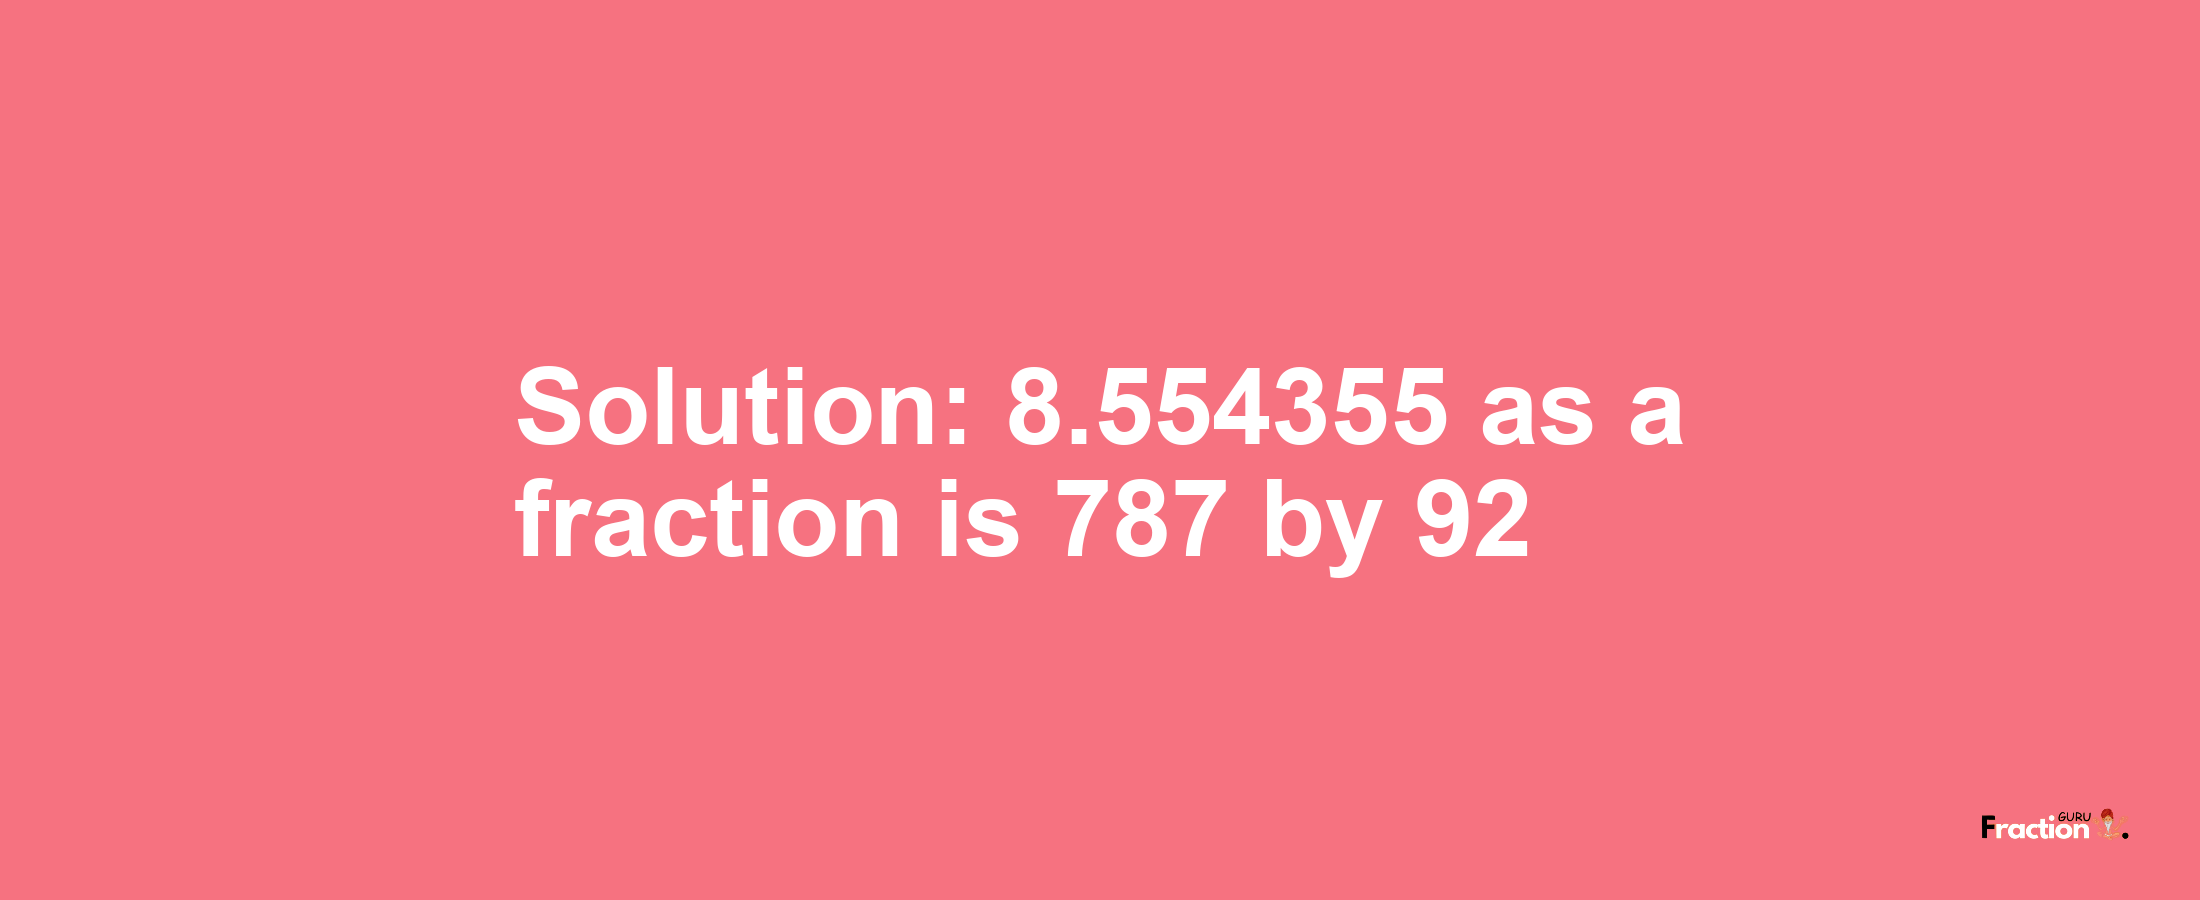 Solution:8.554355 as a fraction is 787/92